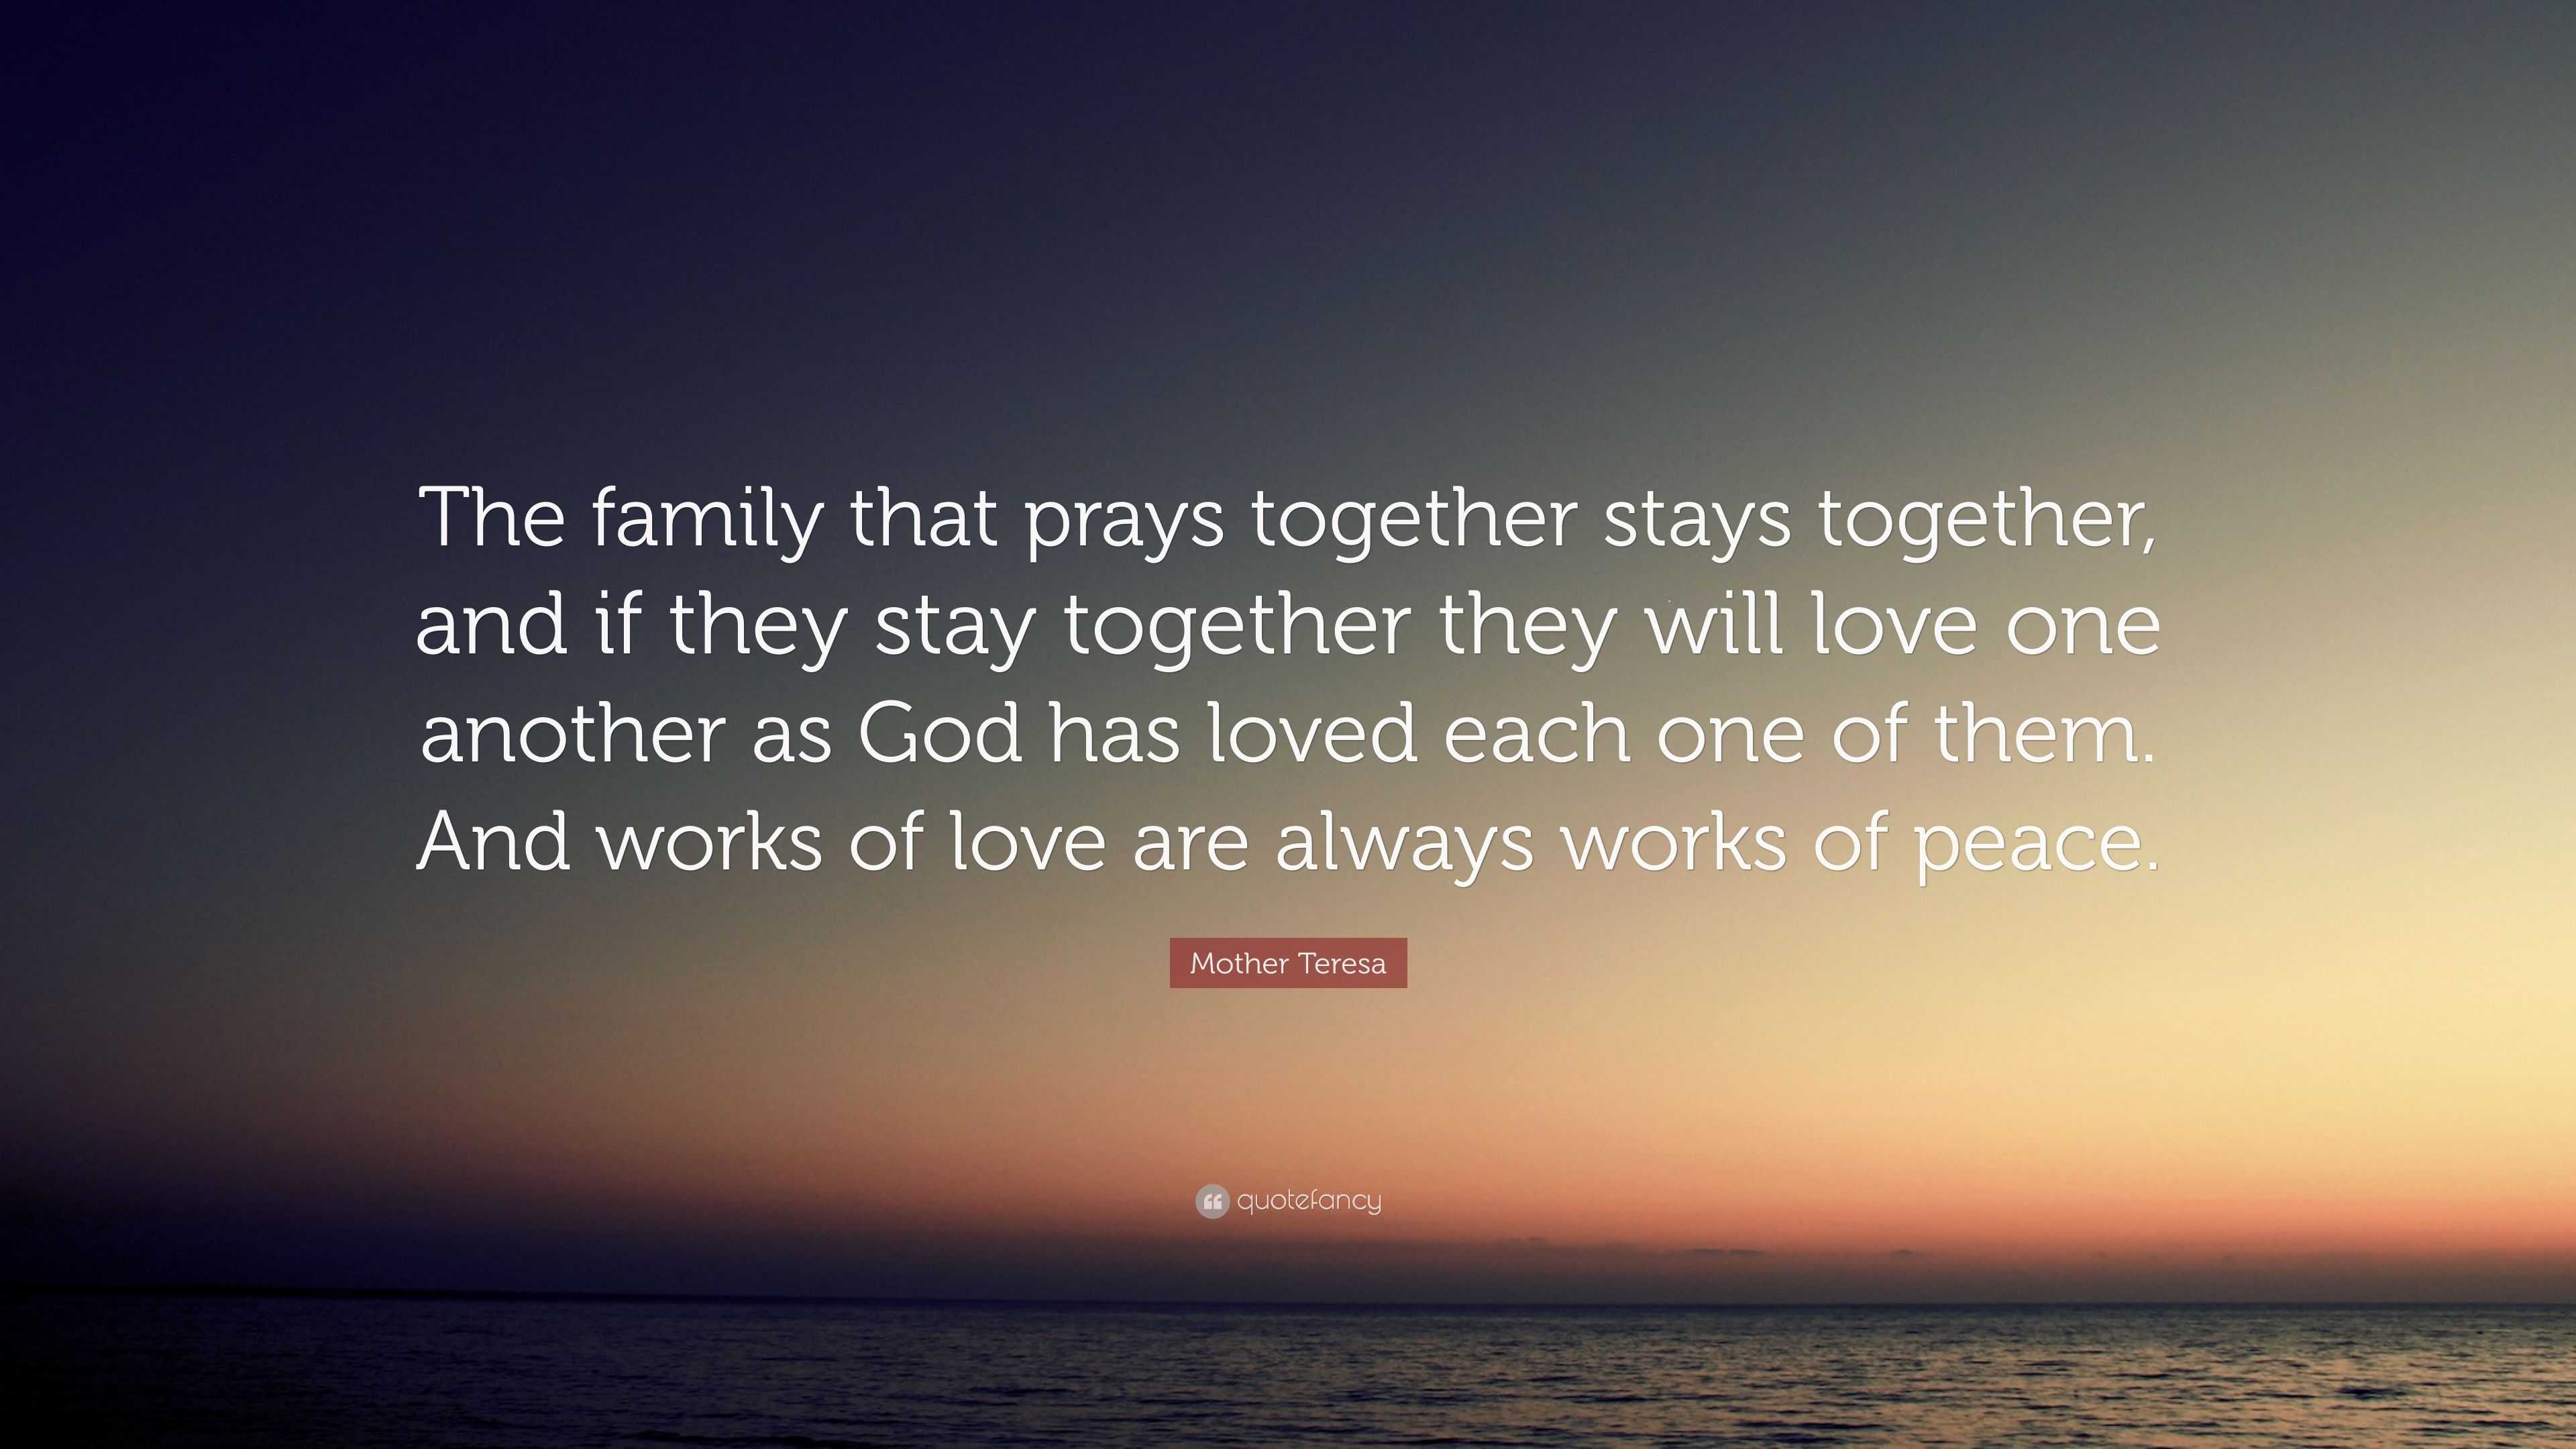 essay about the family that prays together stays together